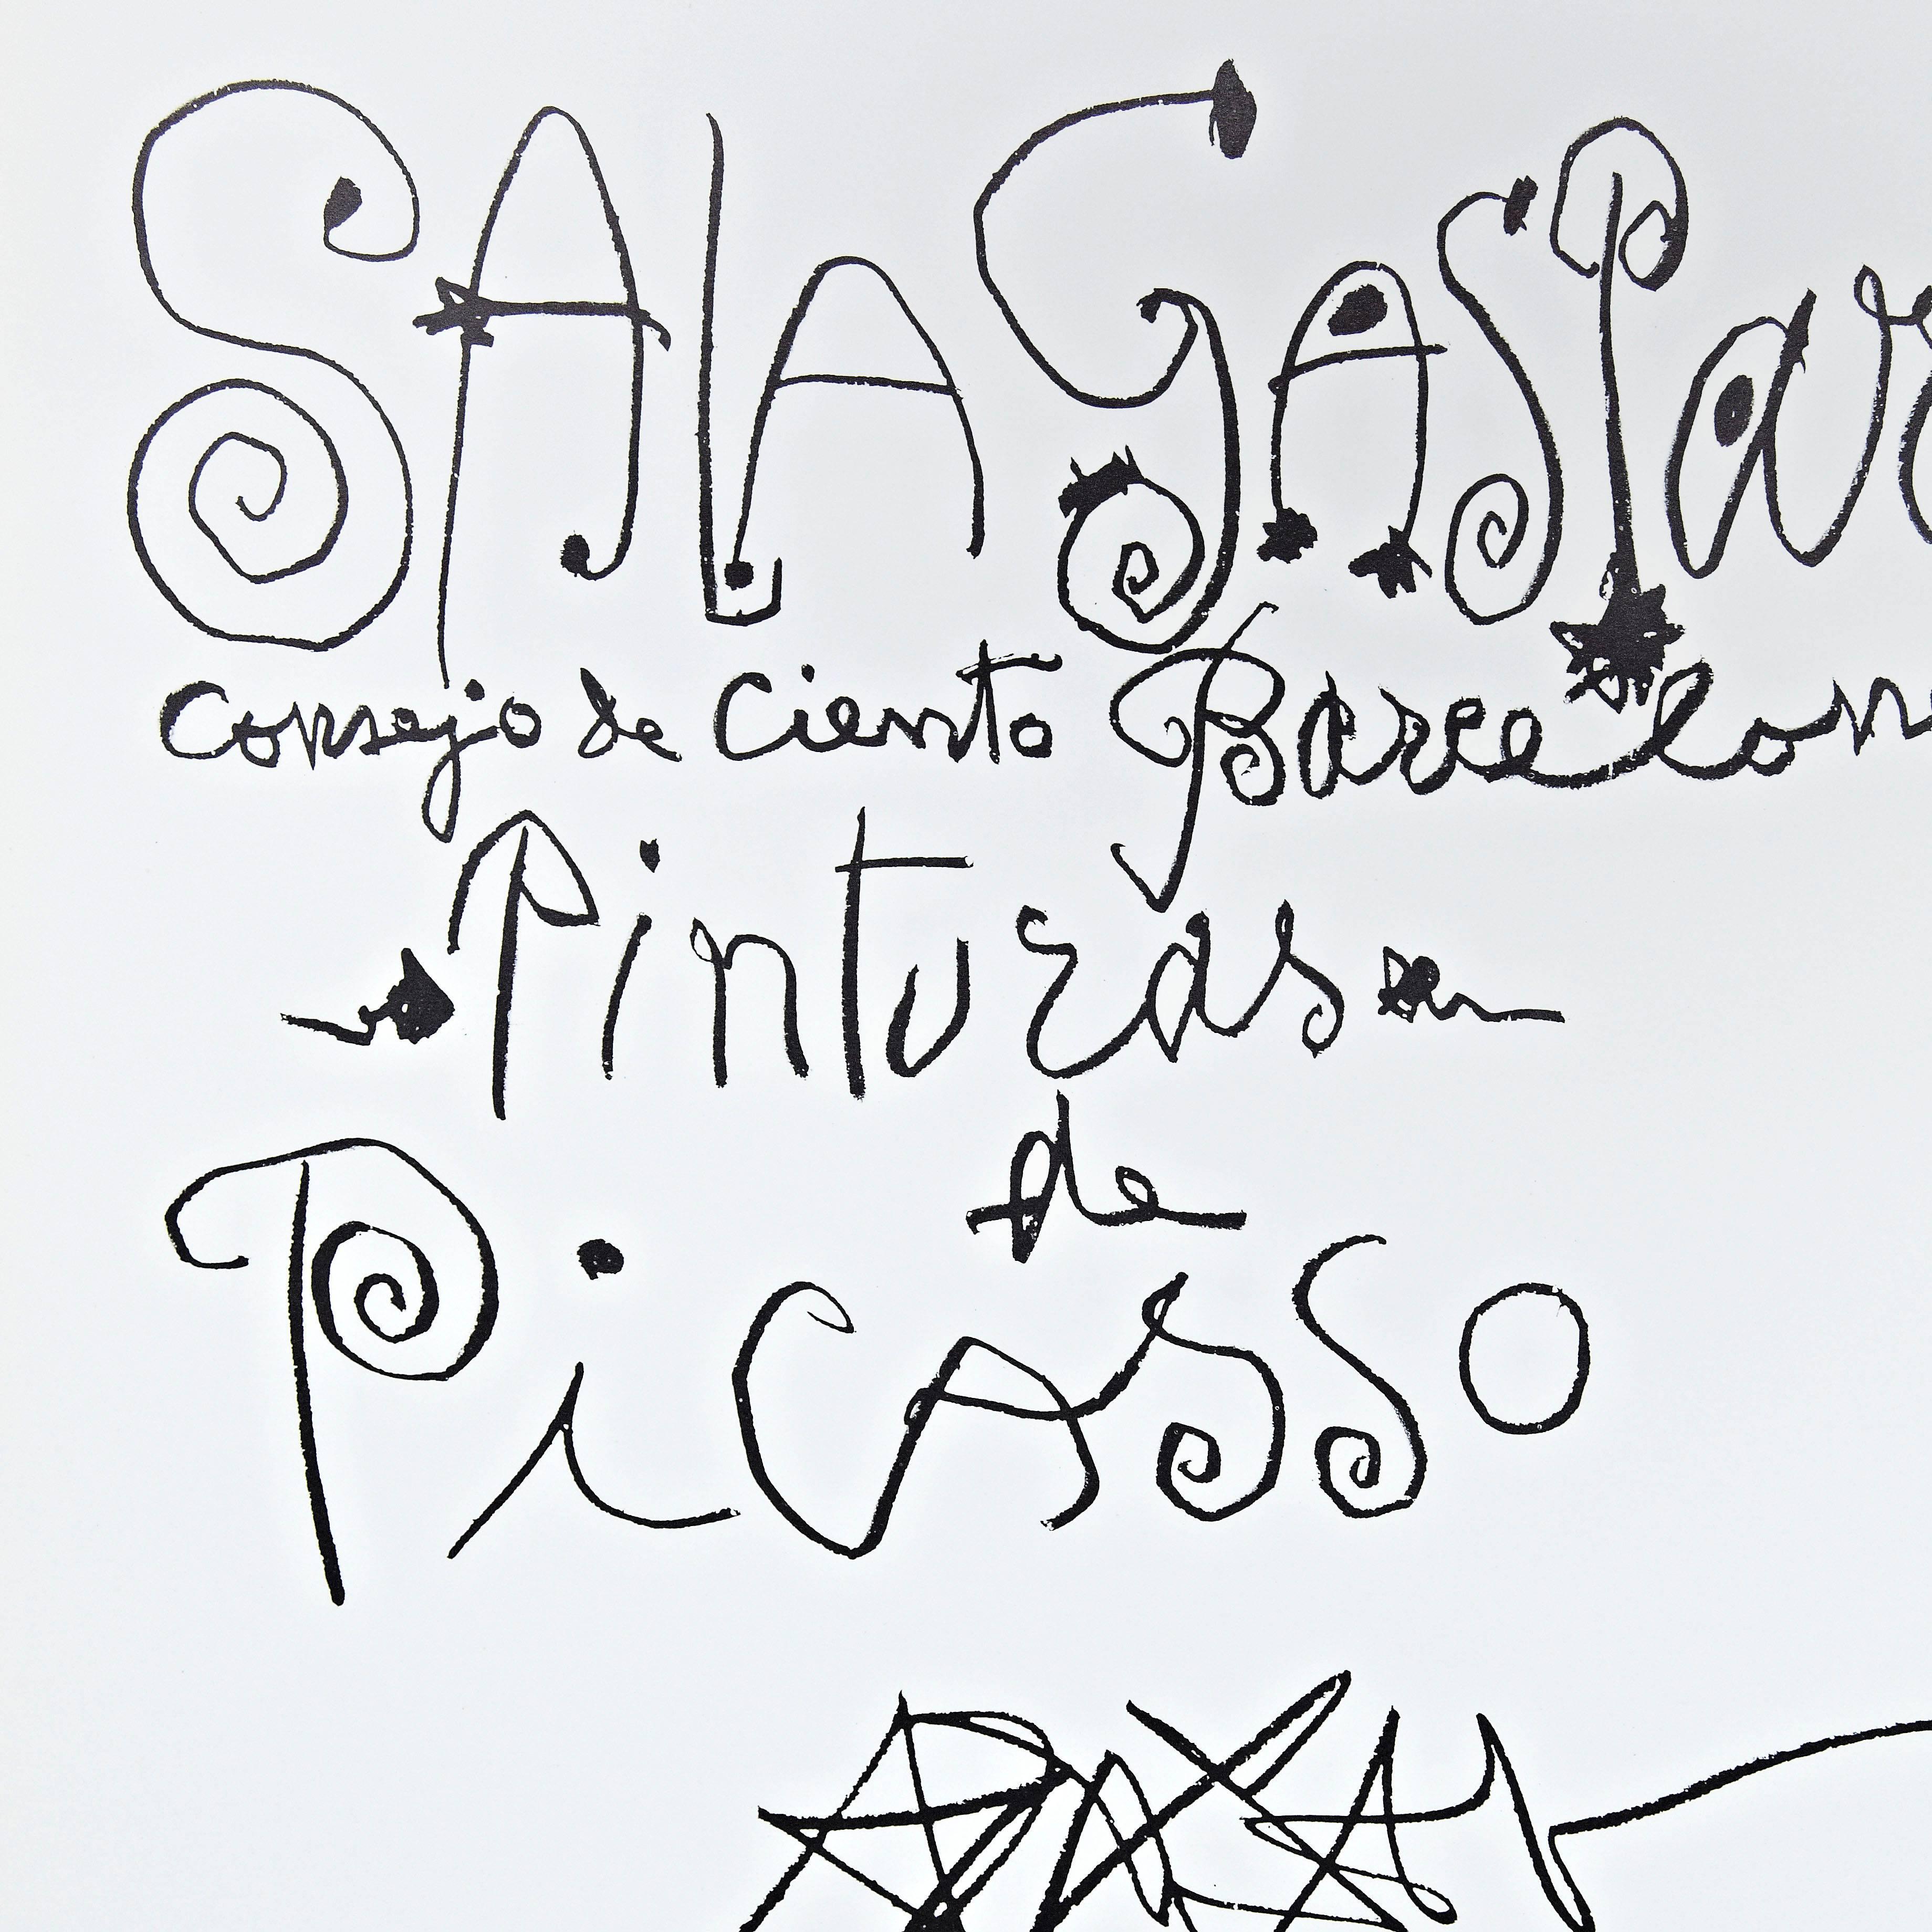 Original lithography poster by Pablo Picasso, 1960.

Made by himself as the poster of his exhibition on the Gallery 